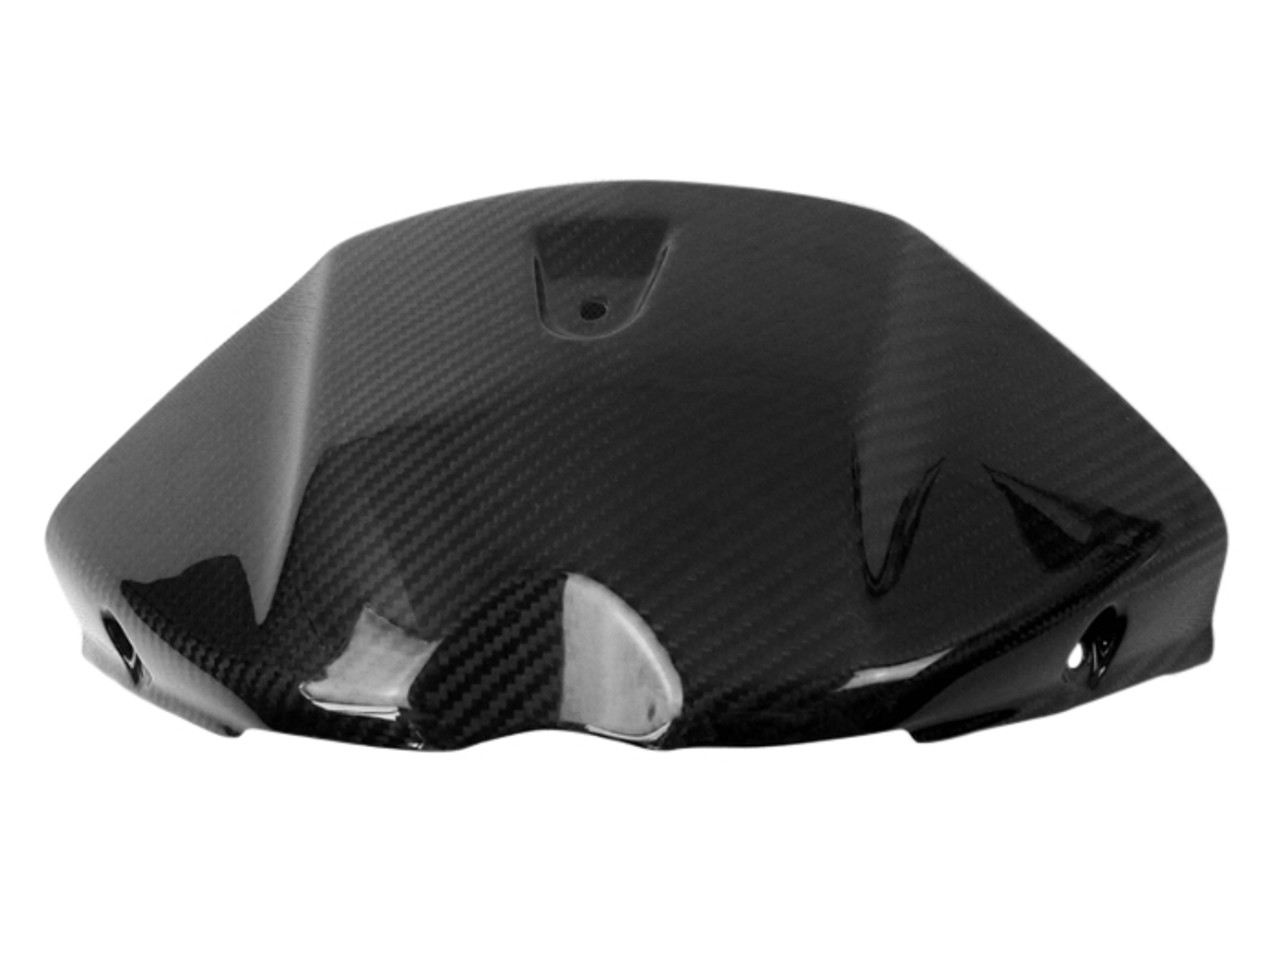 Tank Cover in Glossy Twill weave Carbon Fiber for Triumph Speed Triple 1050R 2016+